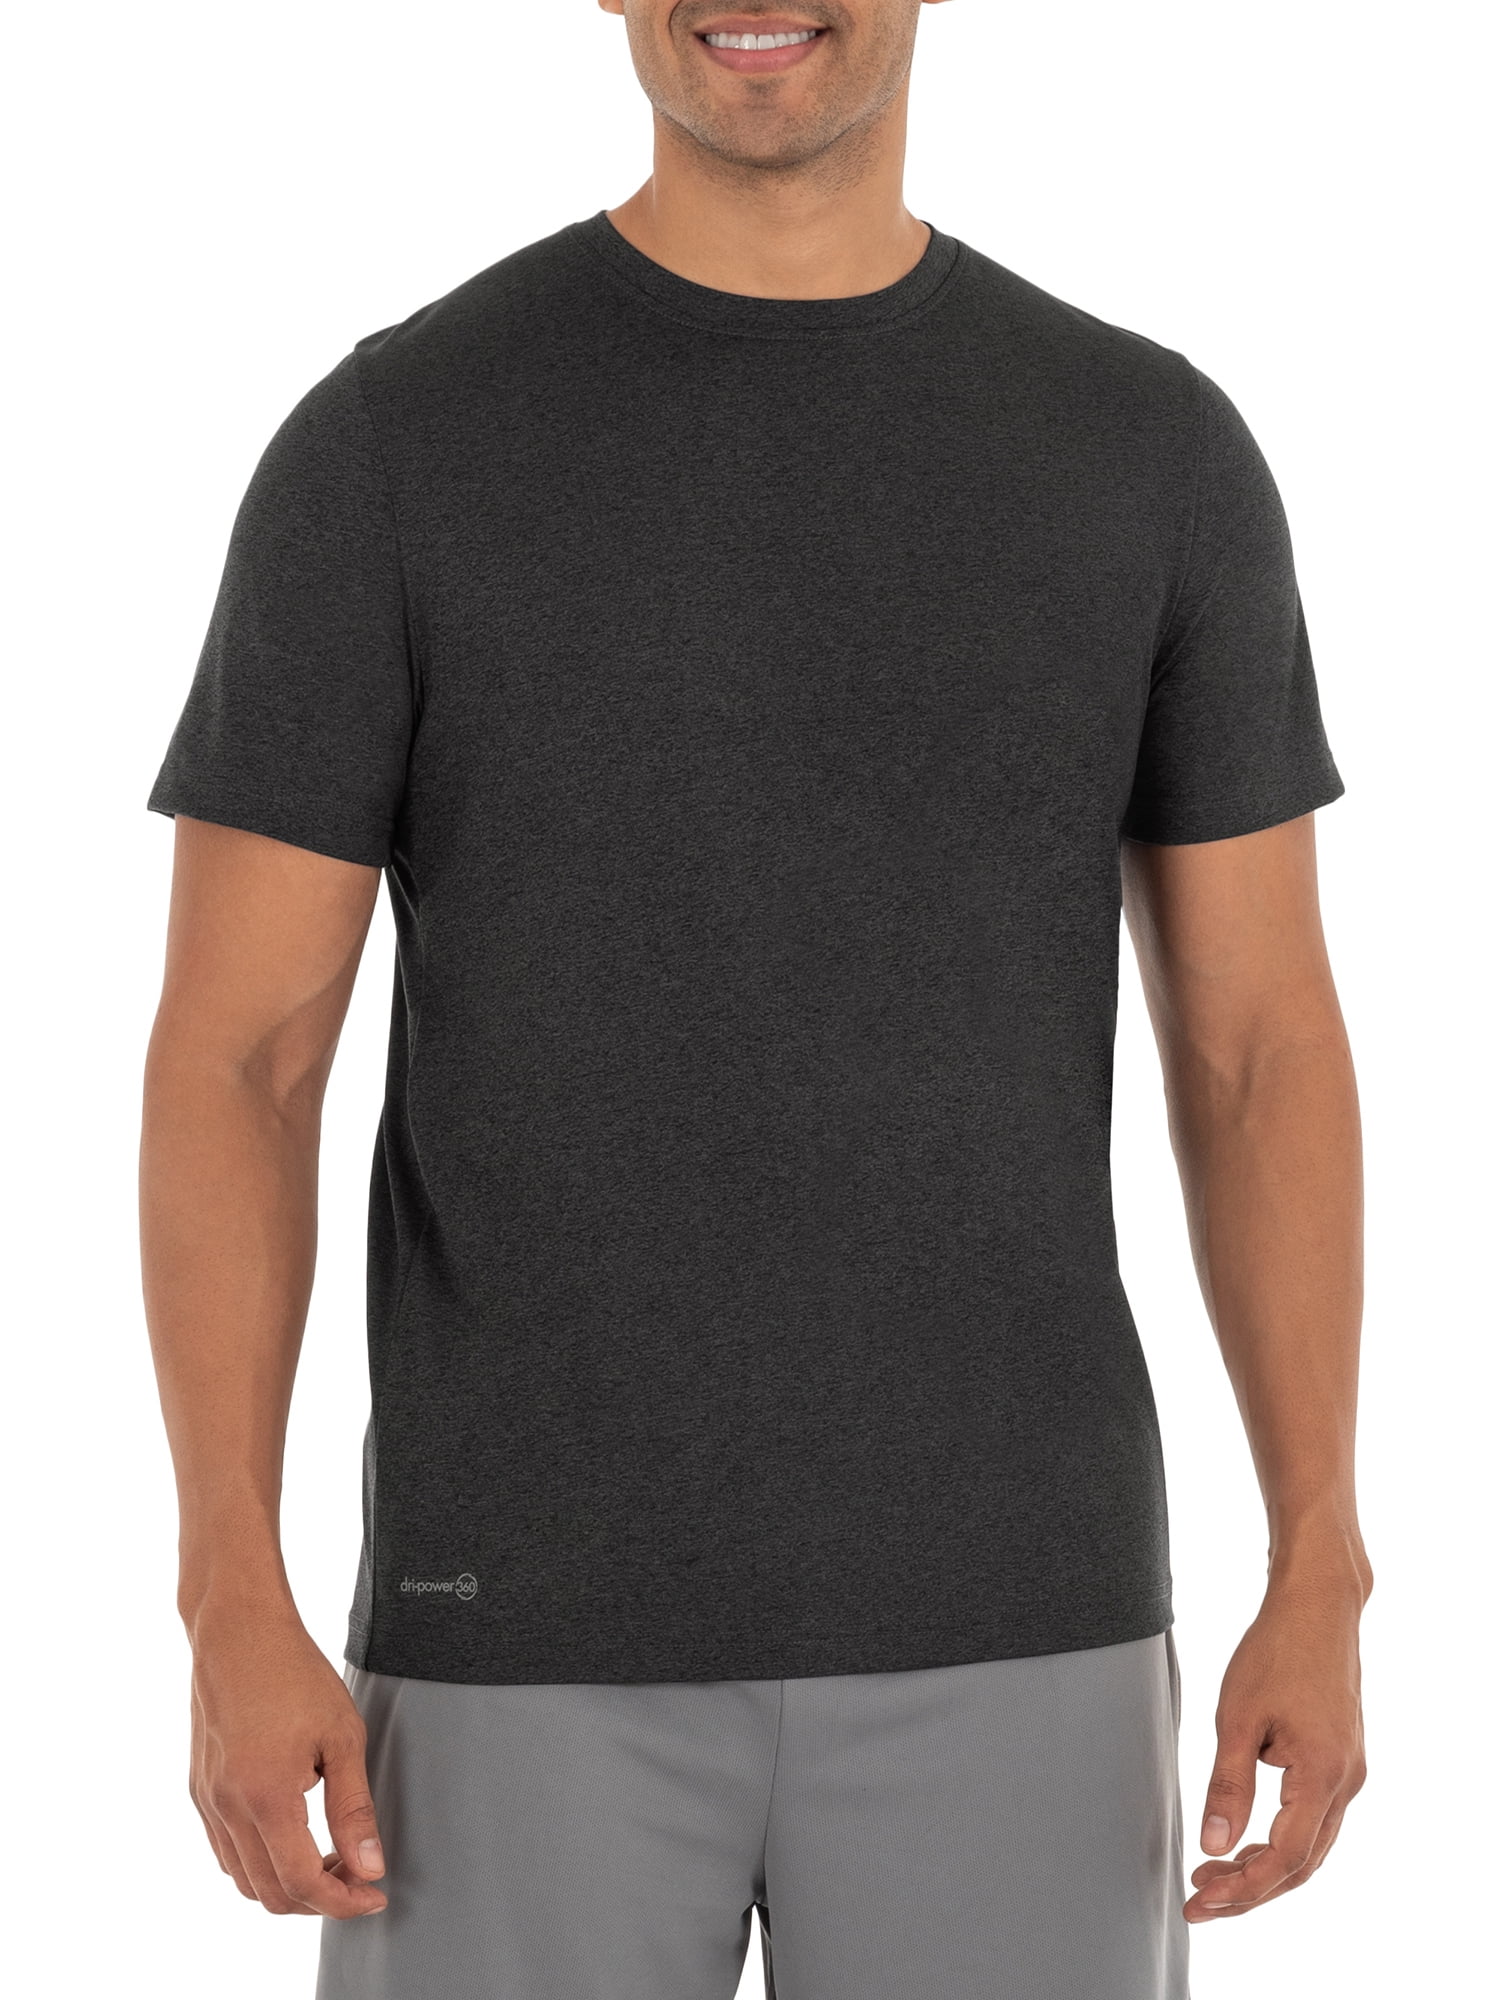 22" NEW WITH TAGS:100% COTTON PLAIN T-SHIRTS WITH ROUND NECK; SIZES 38" CHEST 